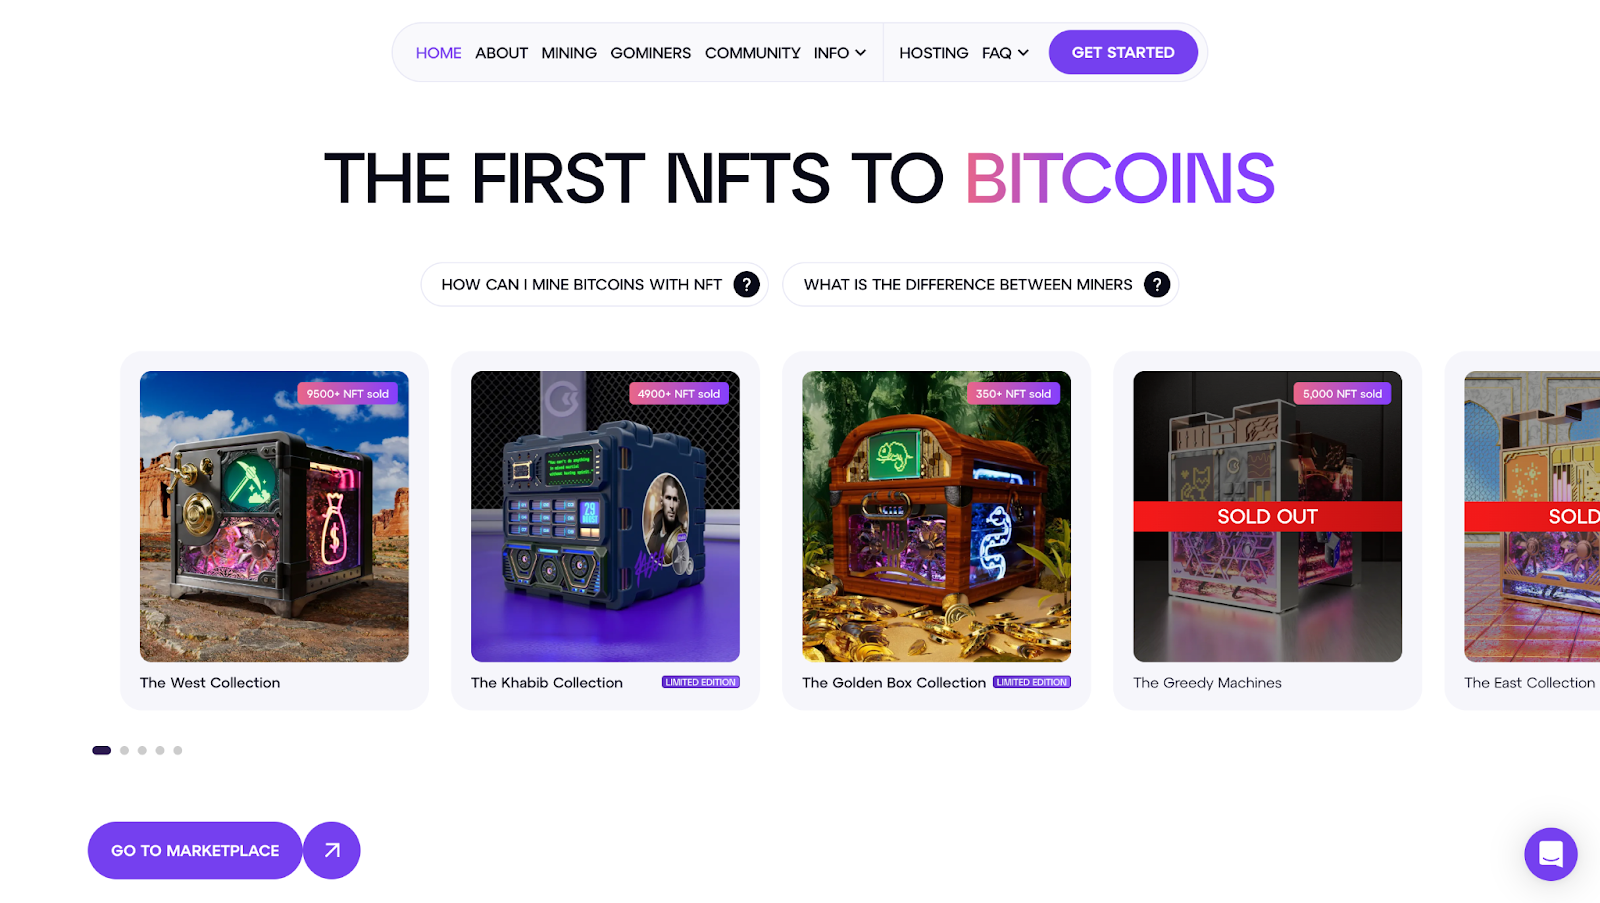 The current list of available NFT miners' collections